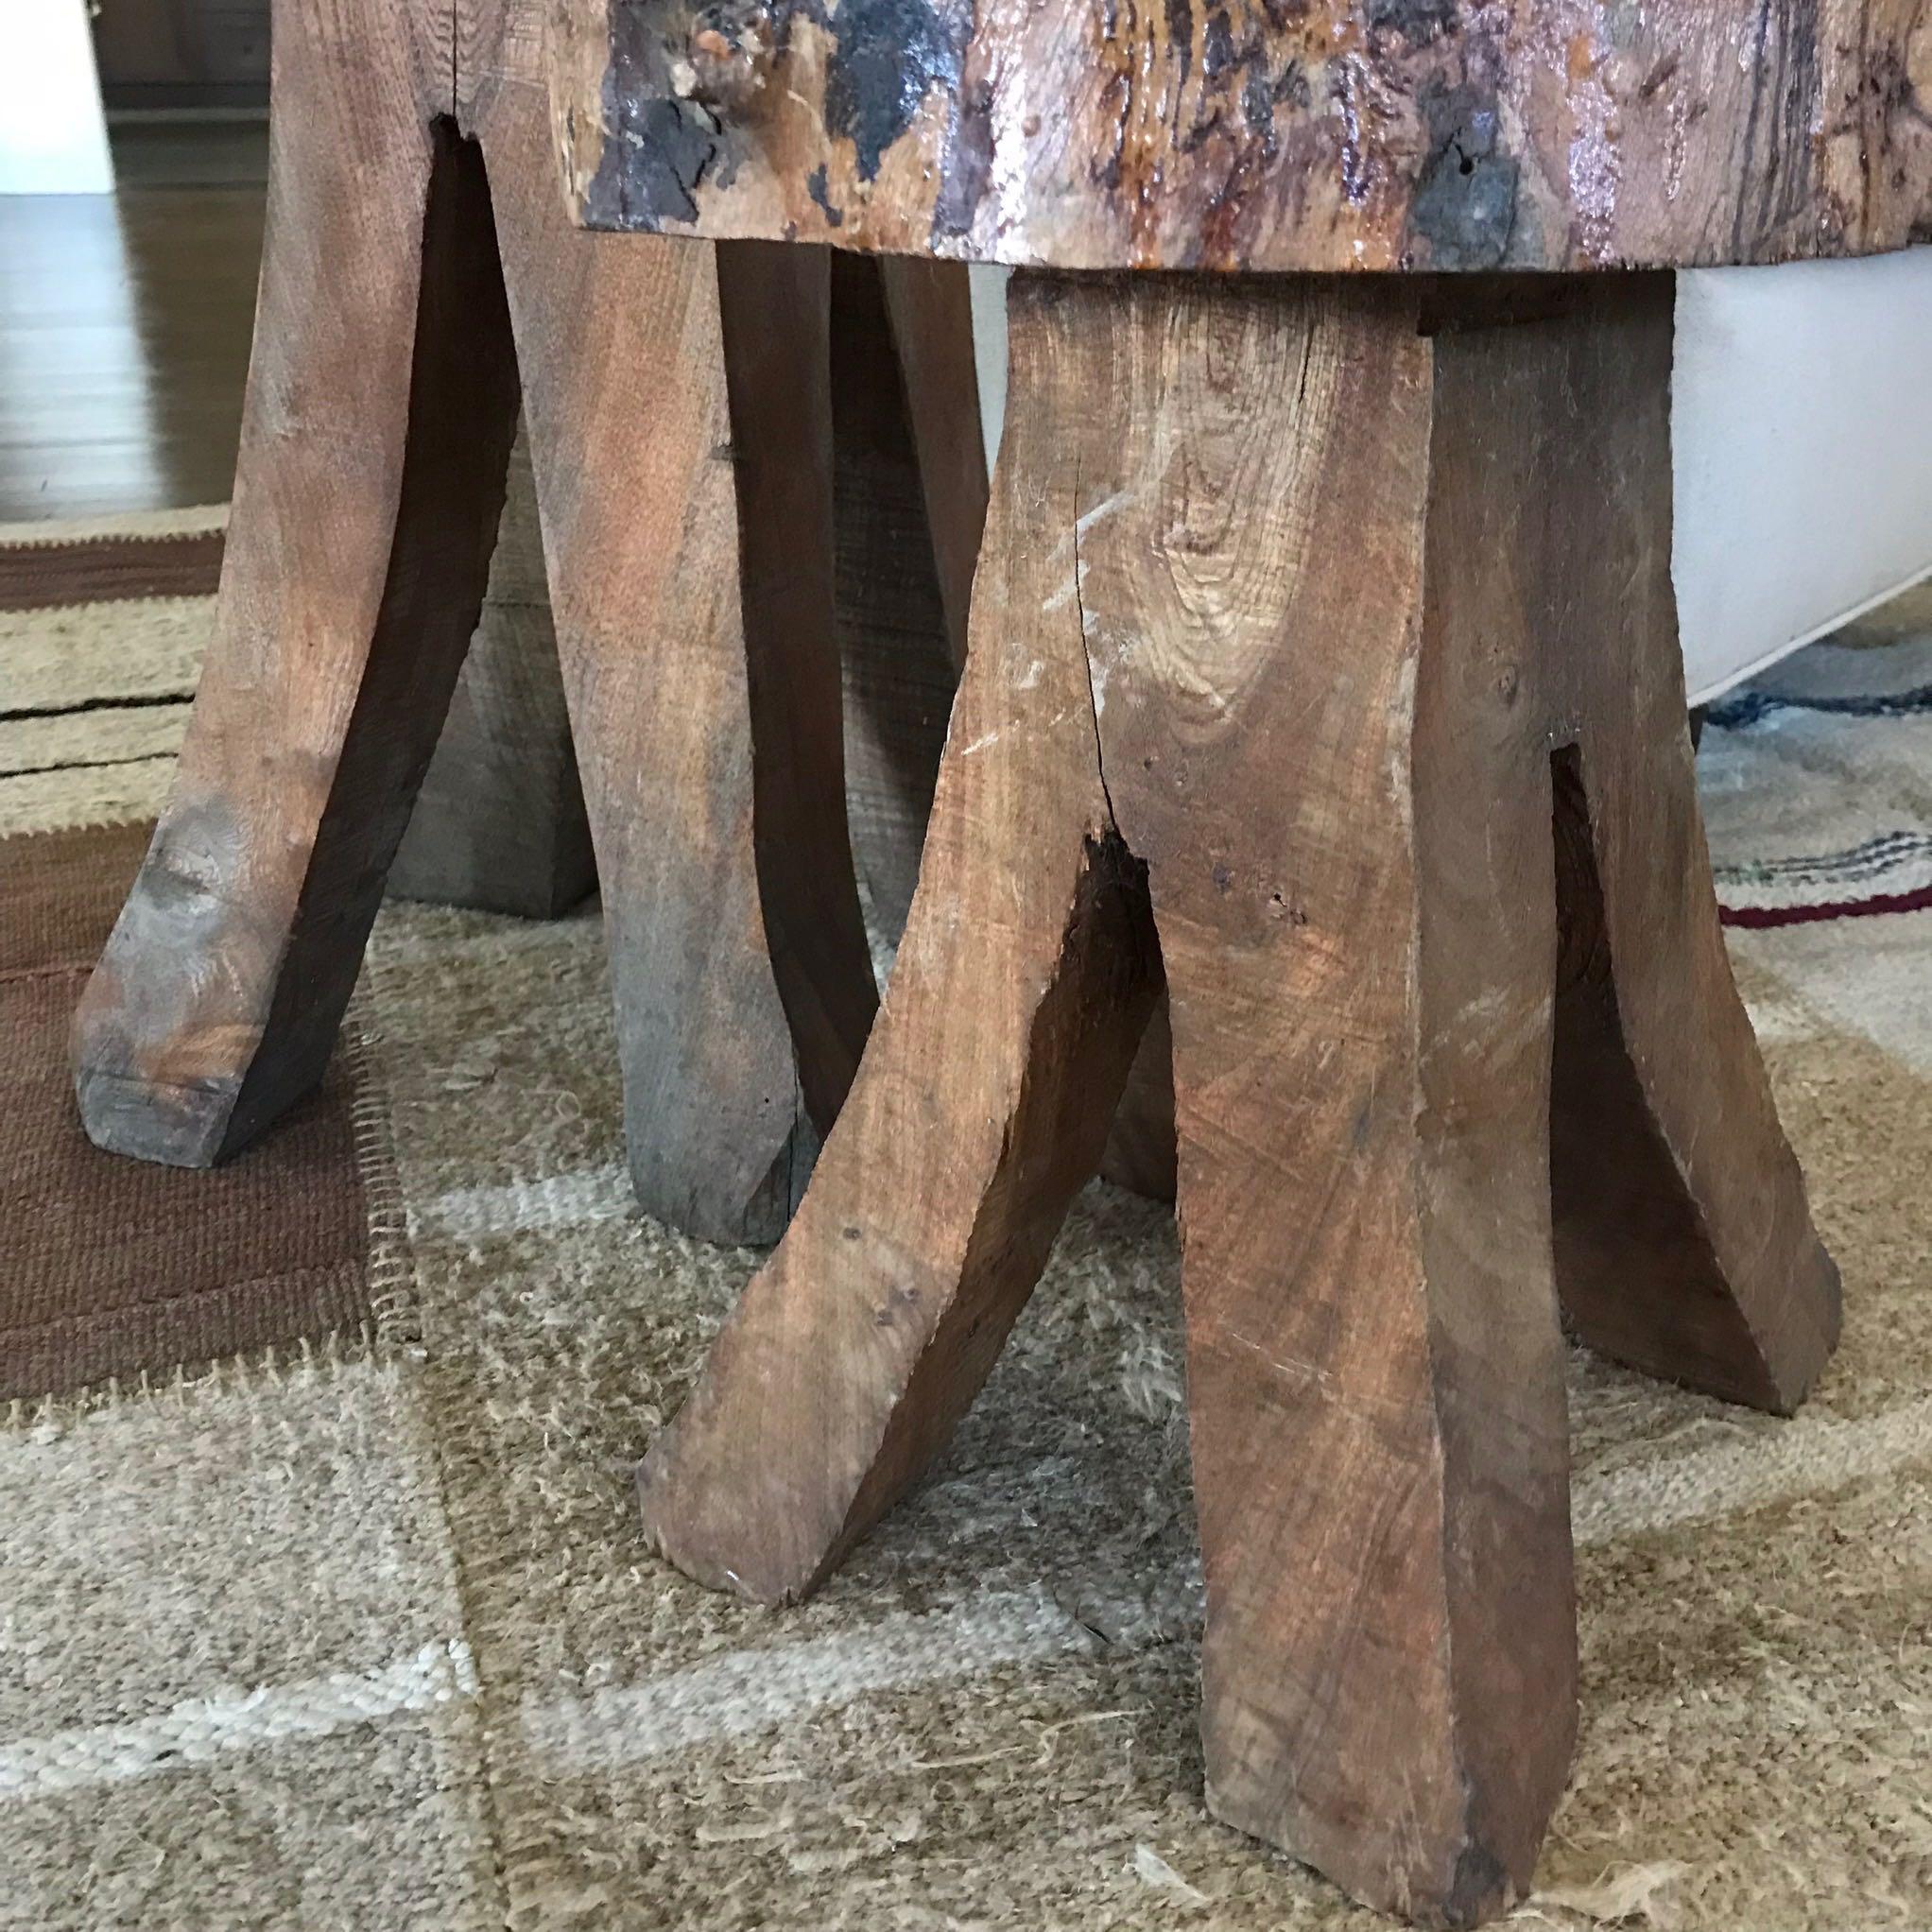 A stool from tree trunk.